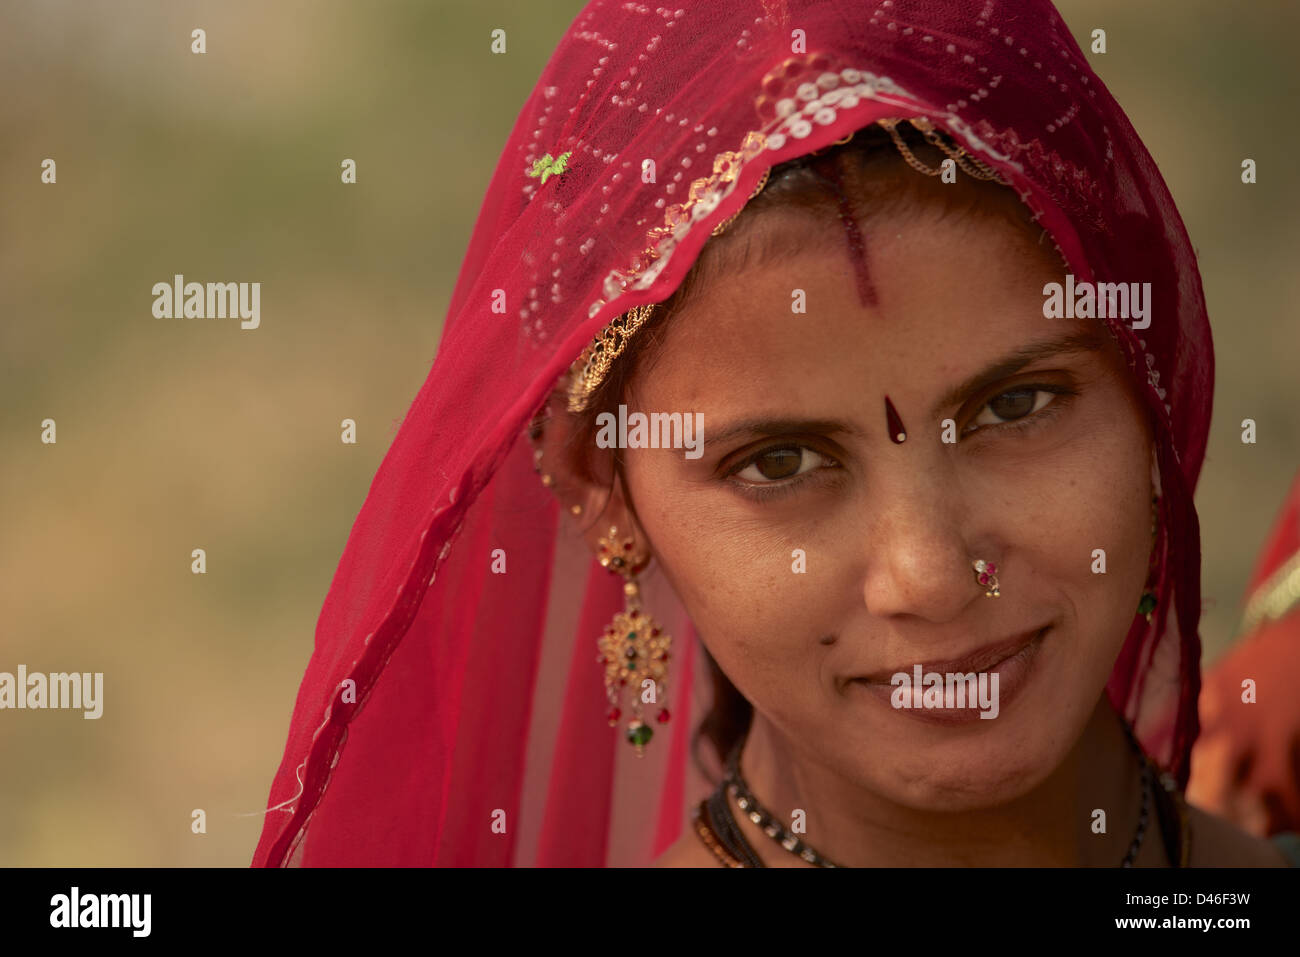 Portrait of young Rajasthani woman Stock Photo